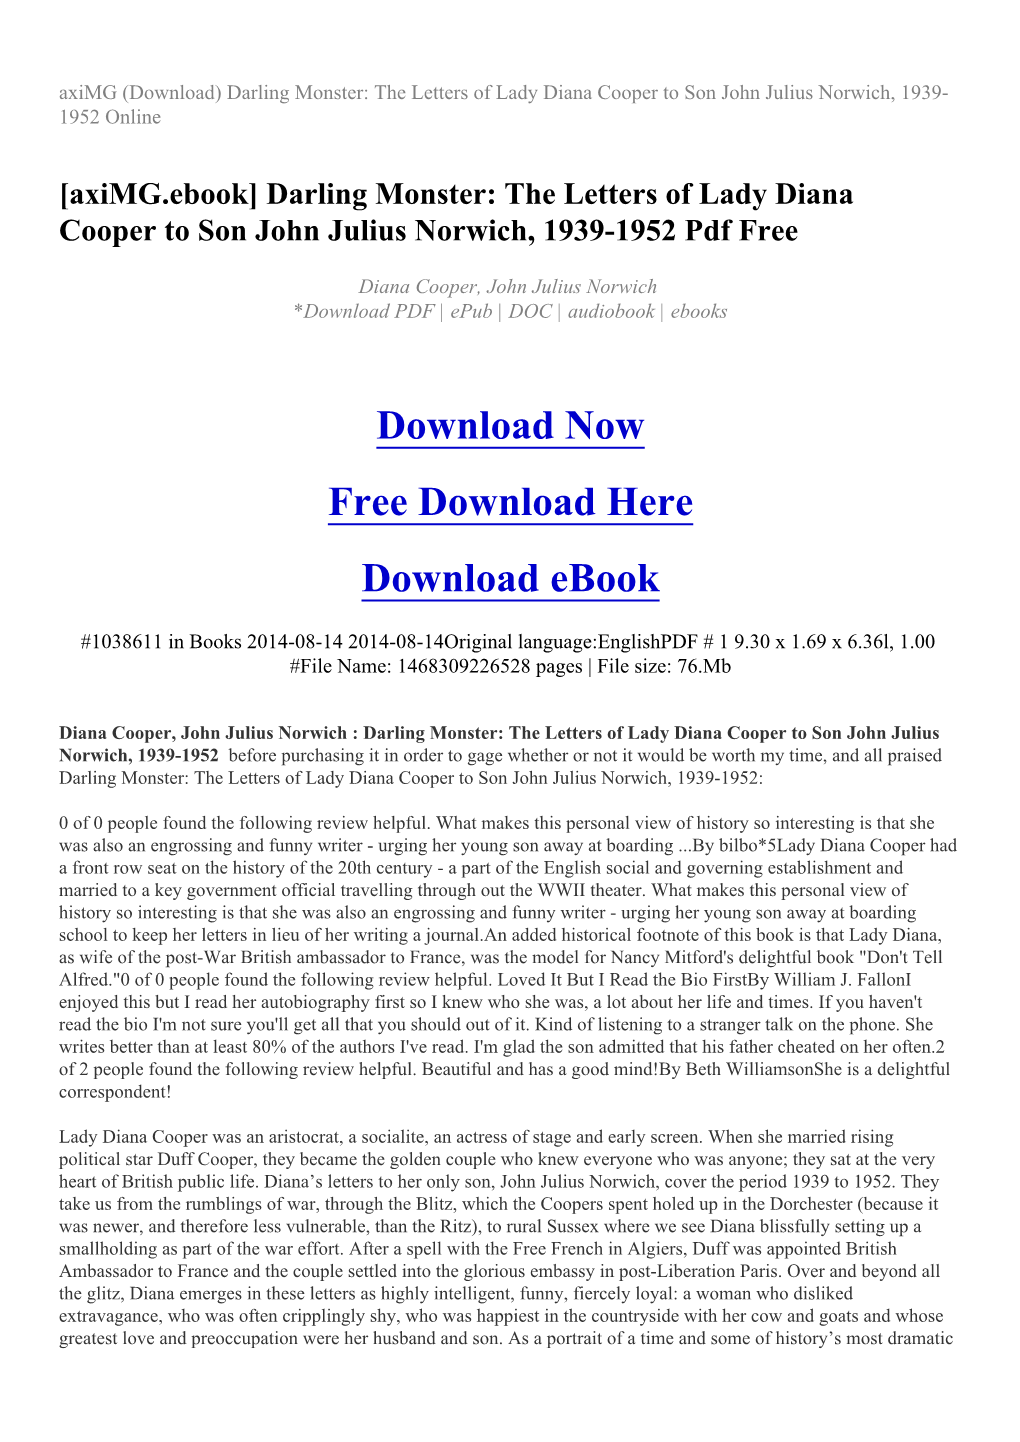 The Letters of Lady Diana Cooper to Son John Julius Norwich, 1939-1952 Pdf Free